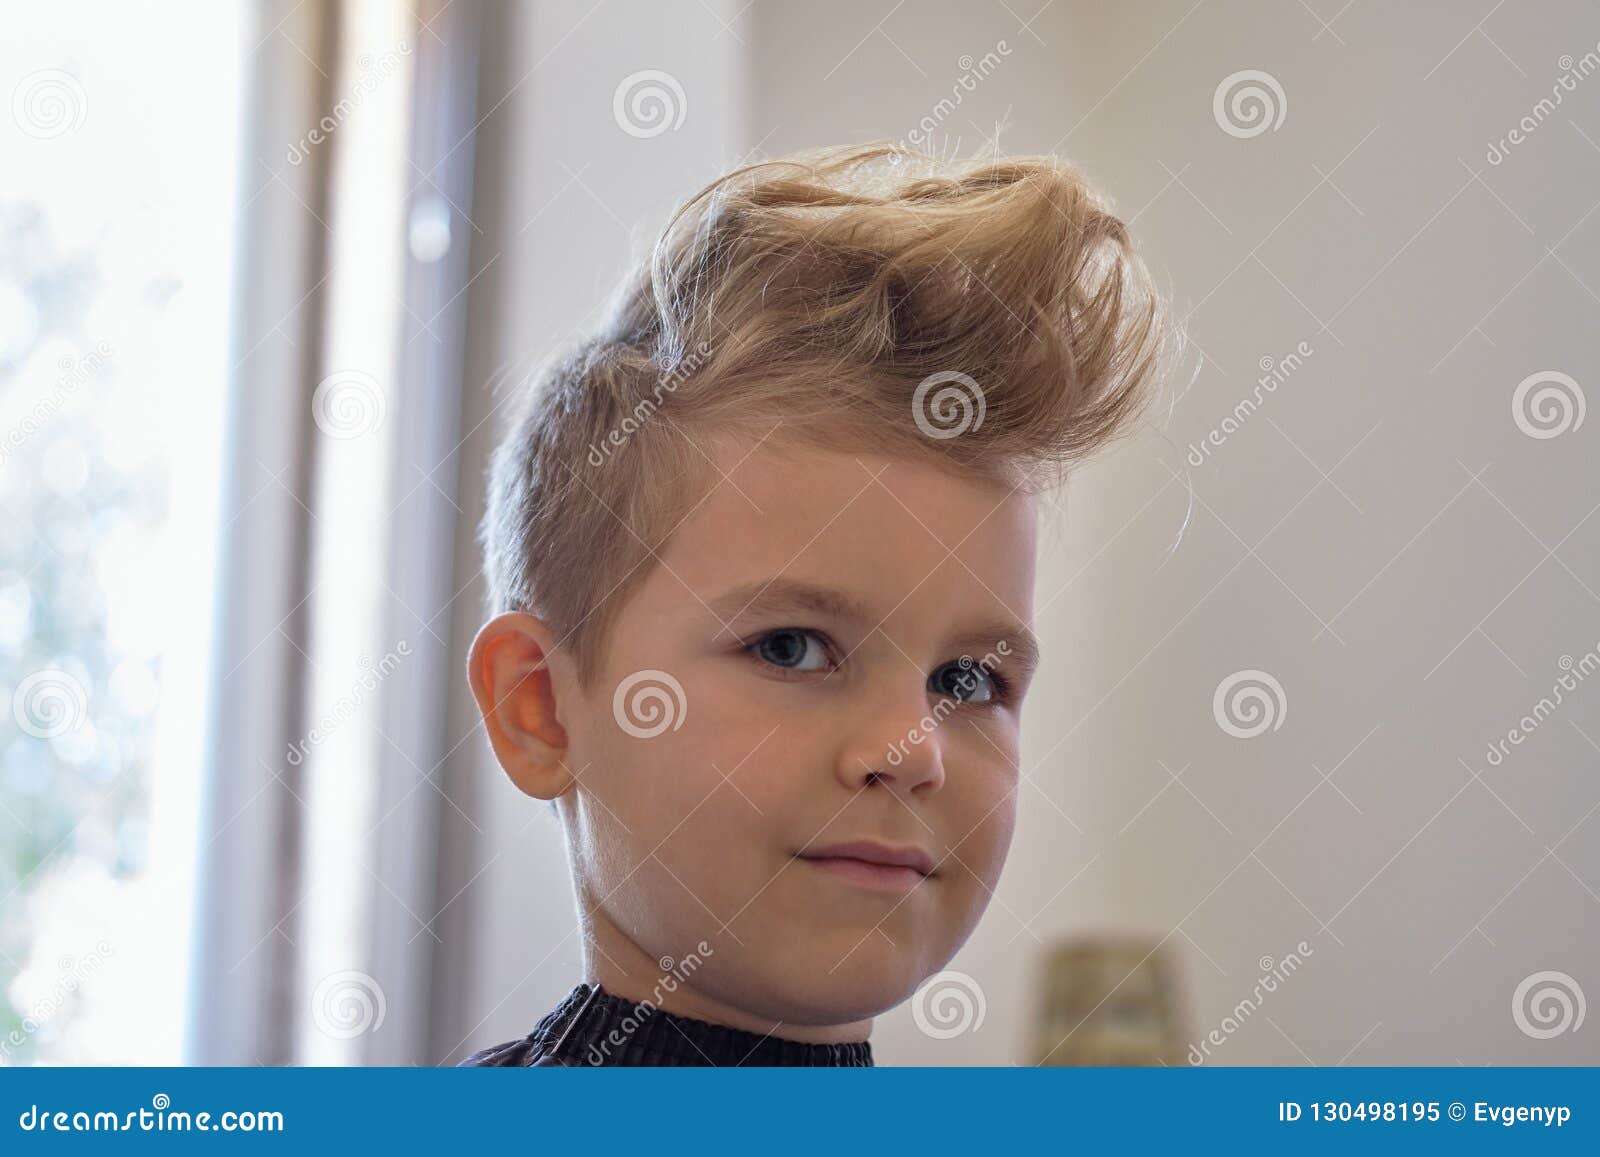 Cute Little Boy with Hairstyle, Sitting at Home Stock Image - Image of  hairstyles, blond: 130498195